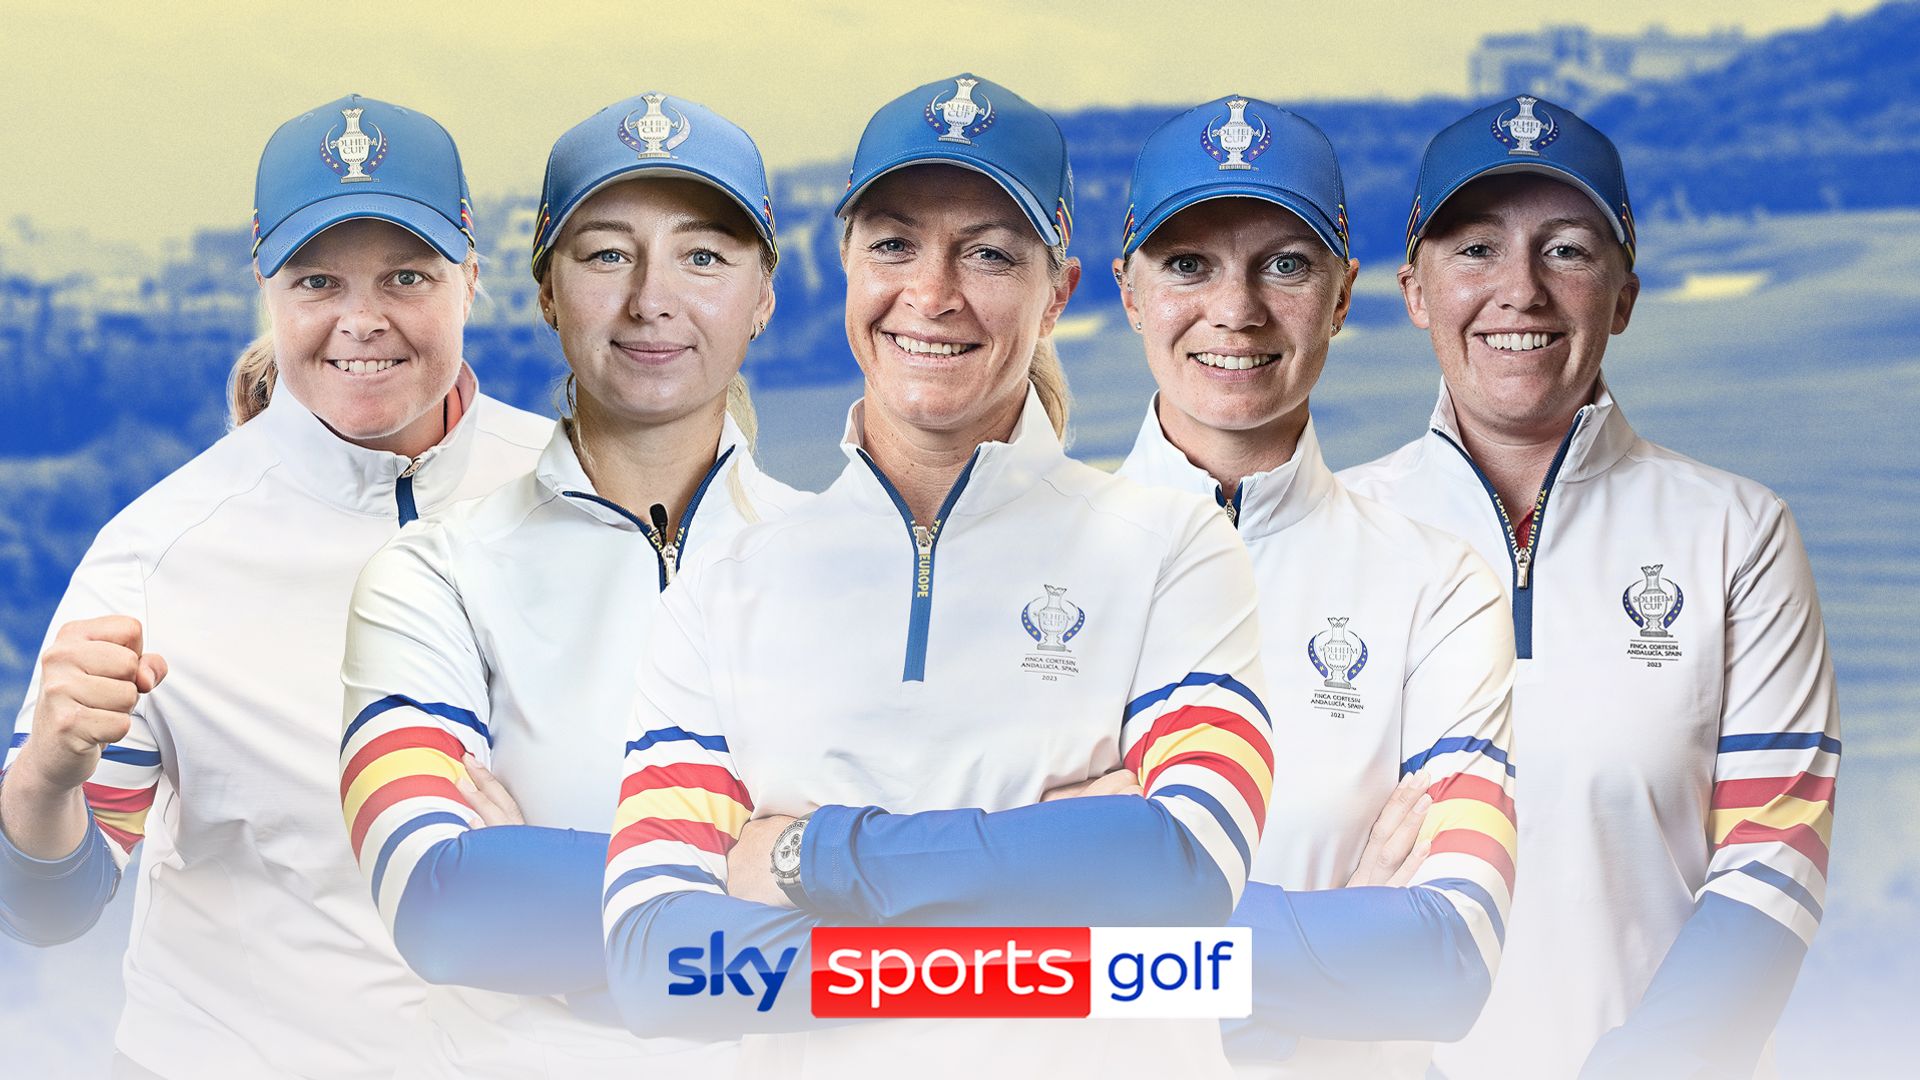 How to watch Solheim Cup, Premier League, EFL, F1 and more this week